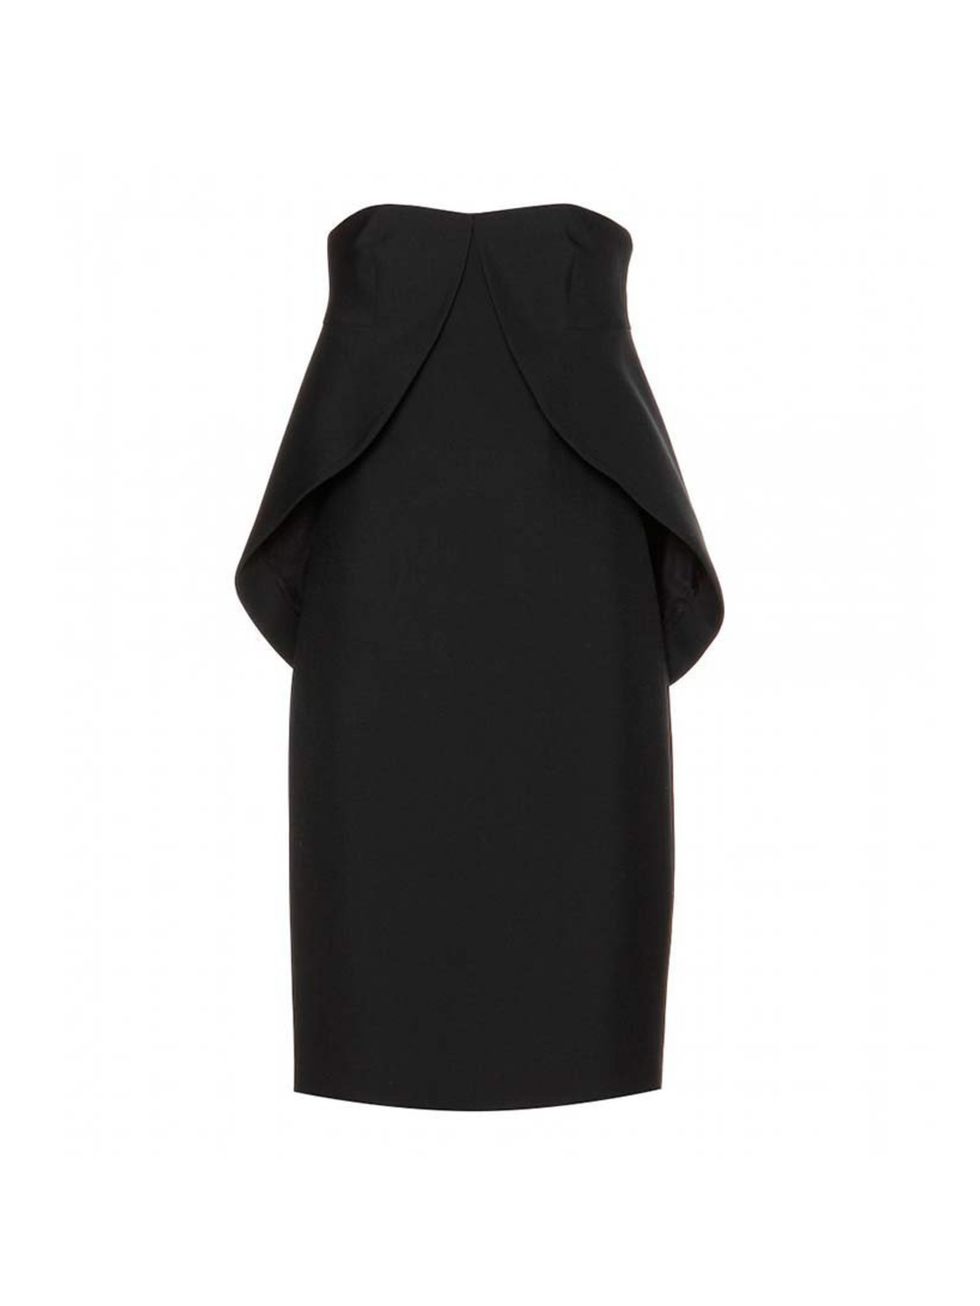 <p>This Balenciaga woven strapless dress is £995 at <a href="http://www.mytheresa.com/en-gb/woven-strapless-dress-284190.html">My Theresa</a>.</p>